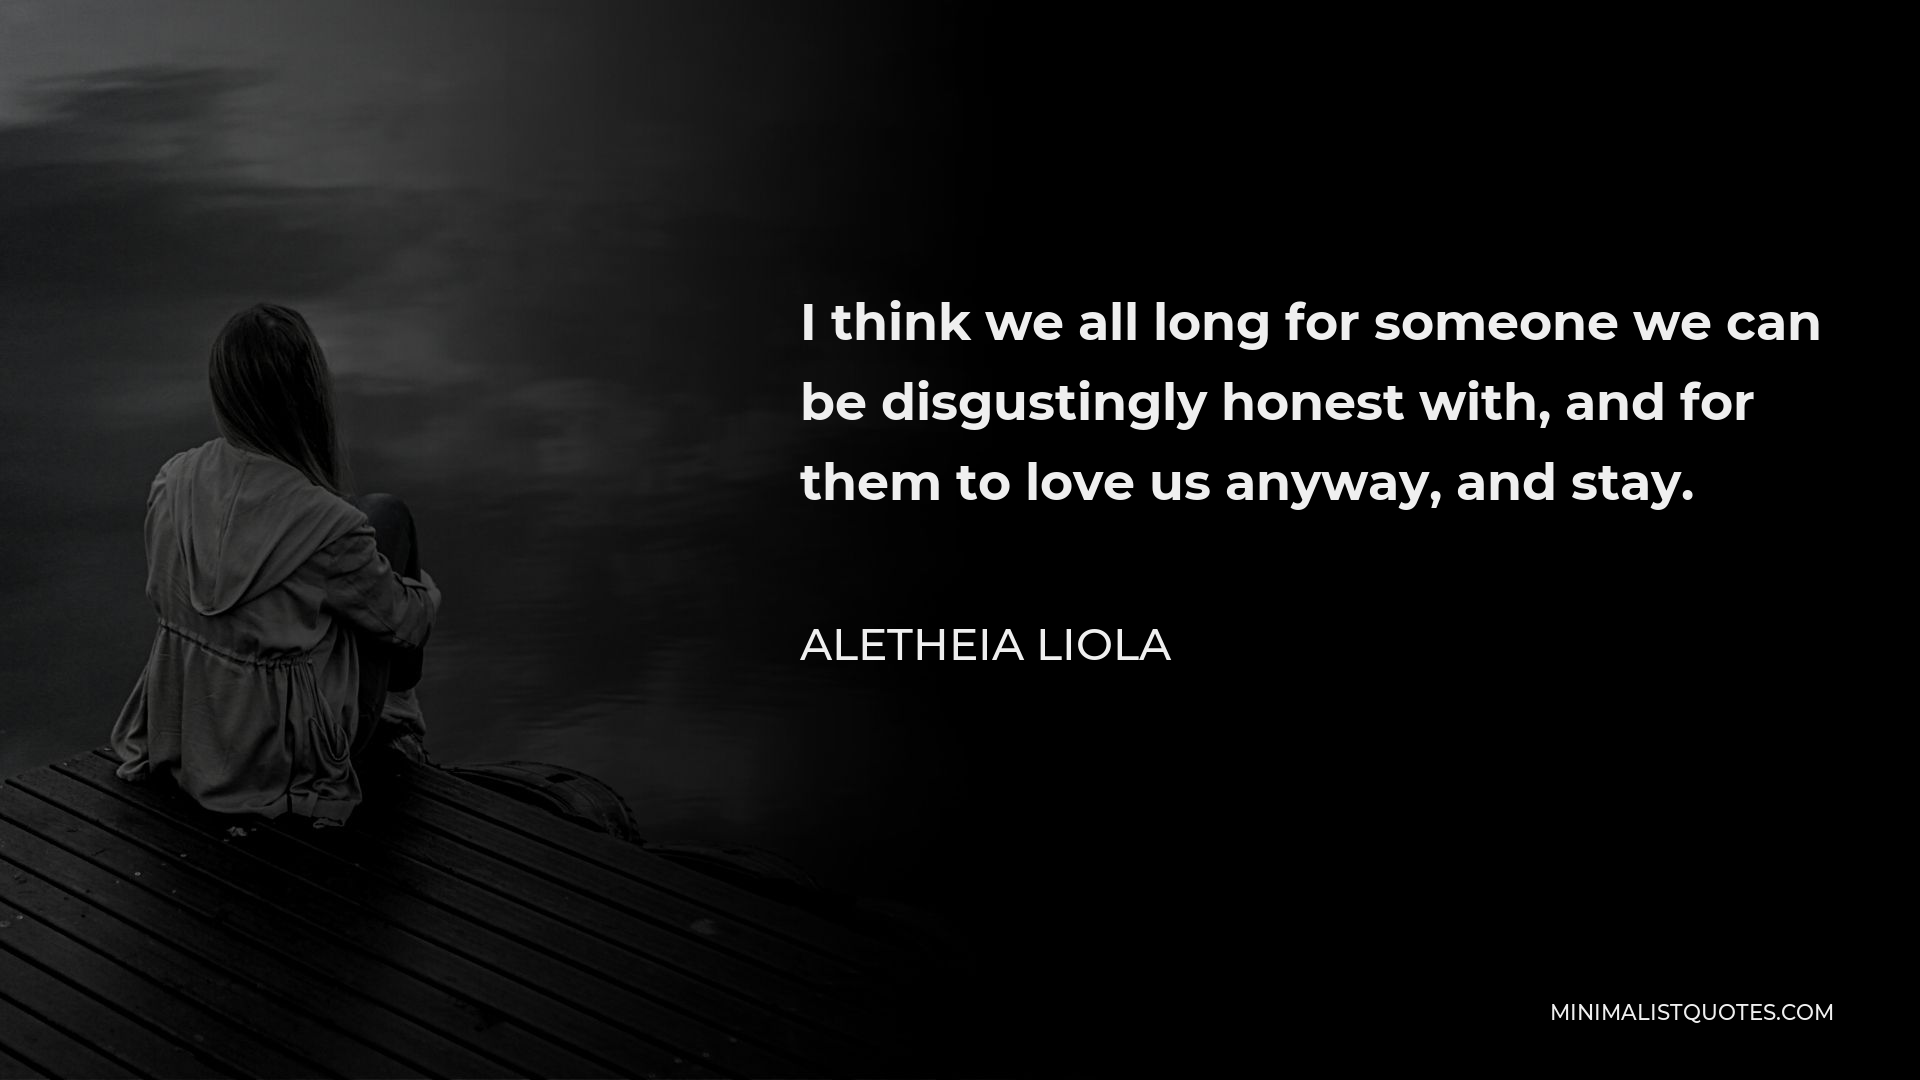 Aletheia Liola Quote - I think we all long for someone we can be disgustingly honest with, and for them to love us anyway, and stay.